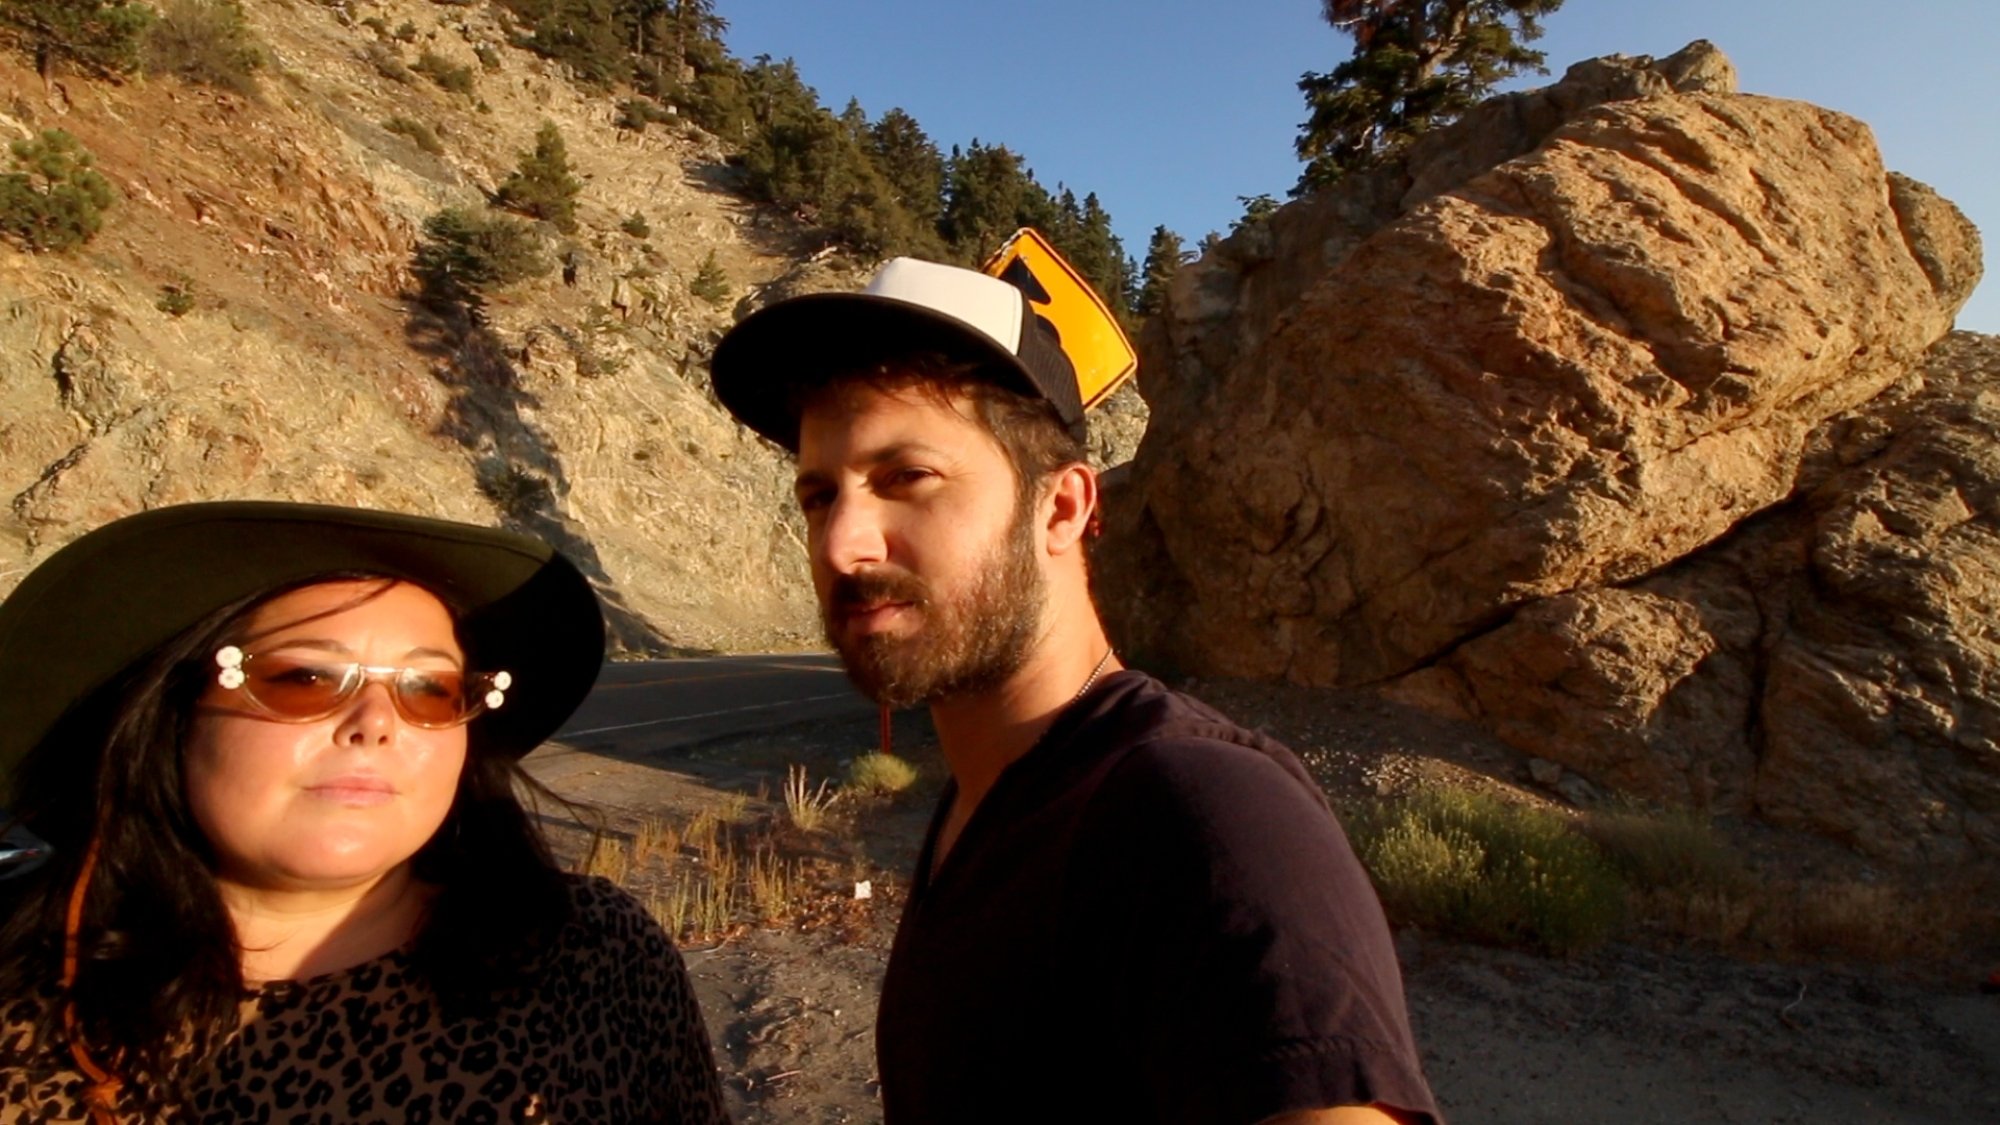 'The Outwaters' Angela Basolis as Ange Bocuzzi and Robbie Banfitch as Robbie Zagorac look at the camera standing in front of a dirt road and a rocky mountain